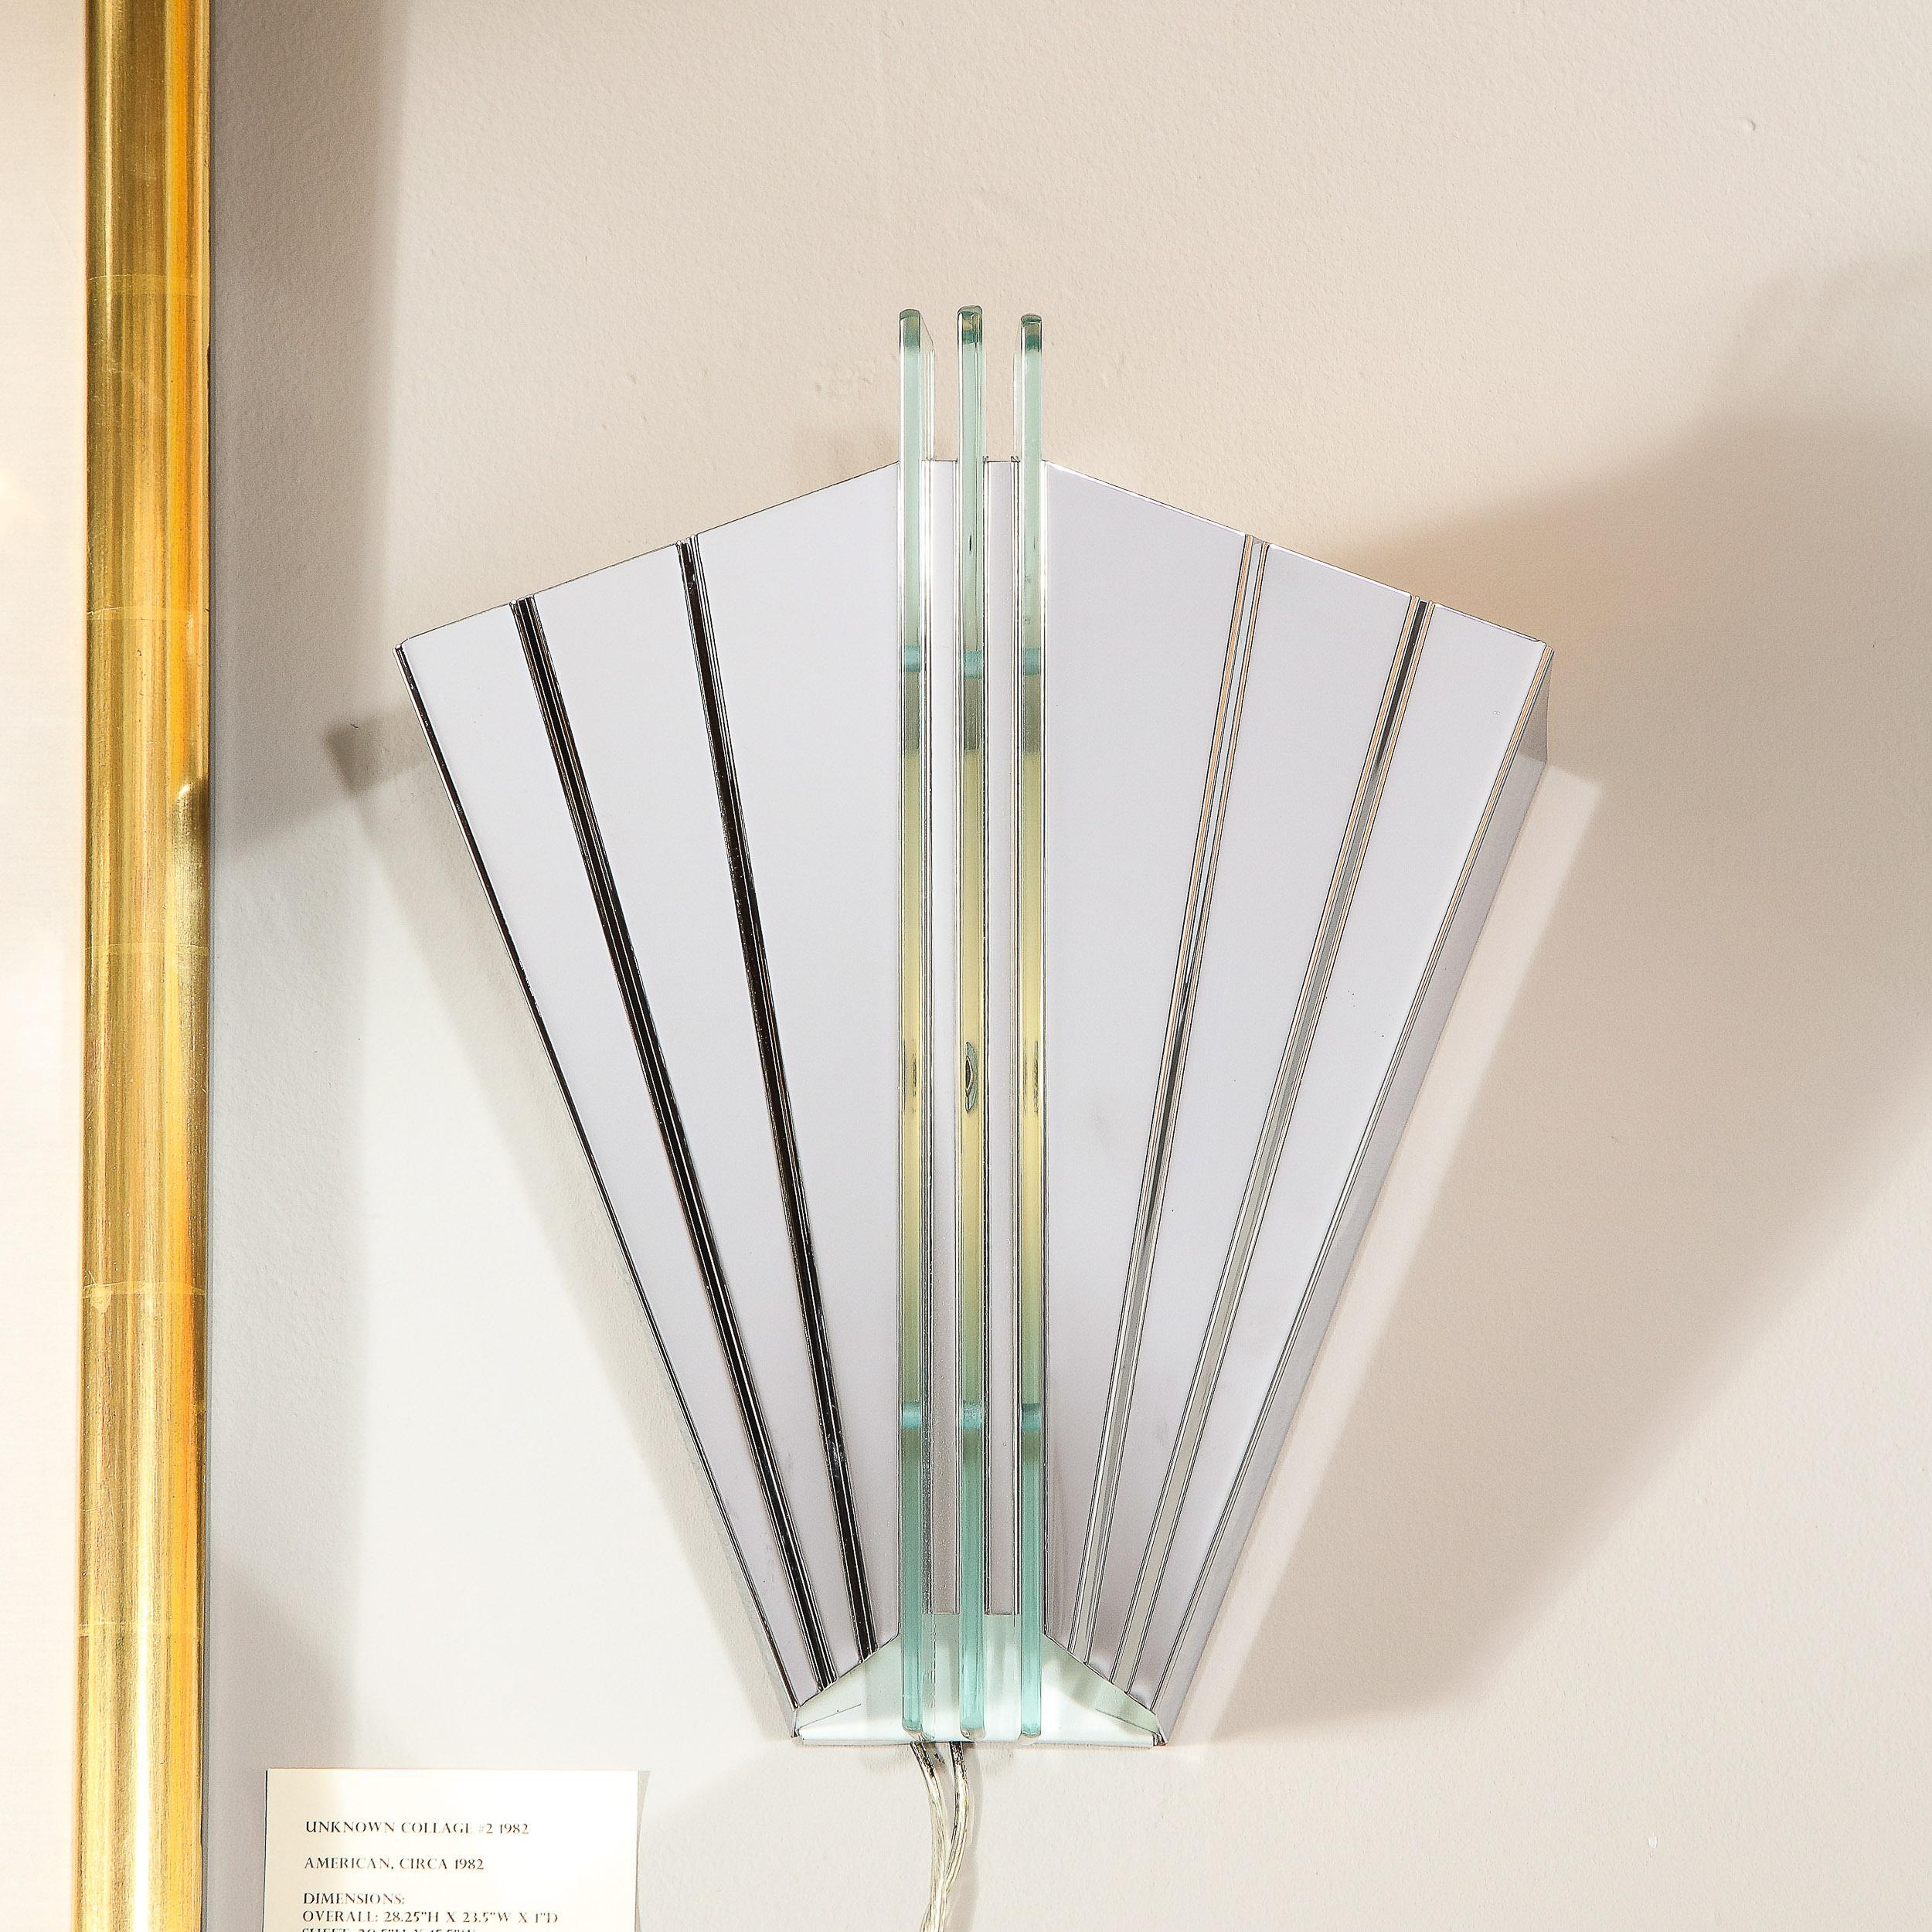 Late 20th Century Pair of Art Deco Skyscraper Style Polished Chrome & Glass Fan Sconces